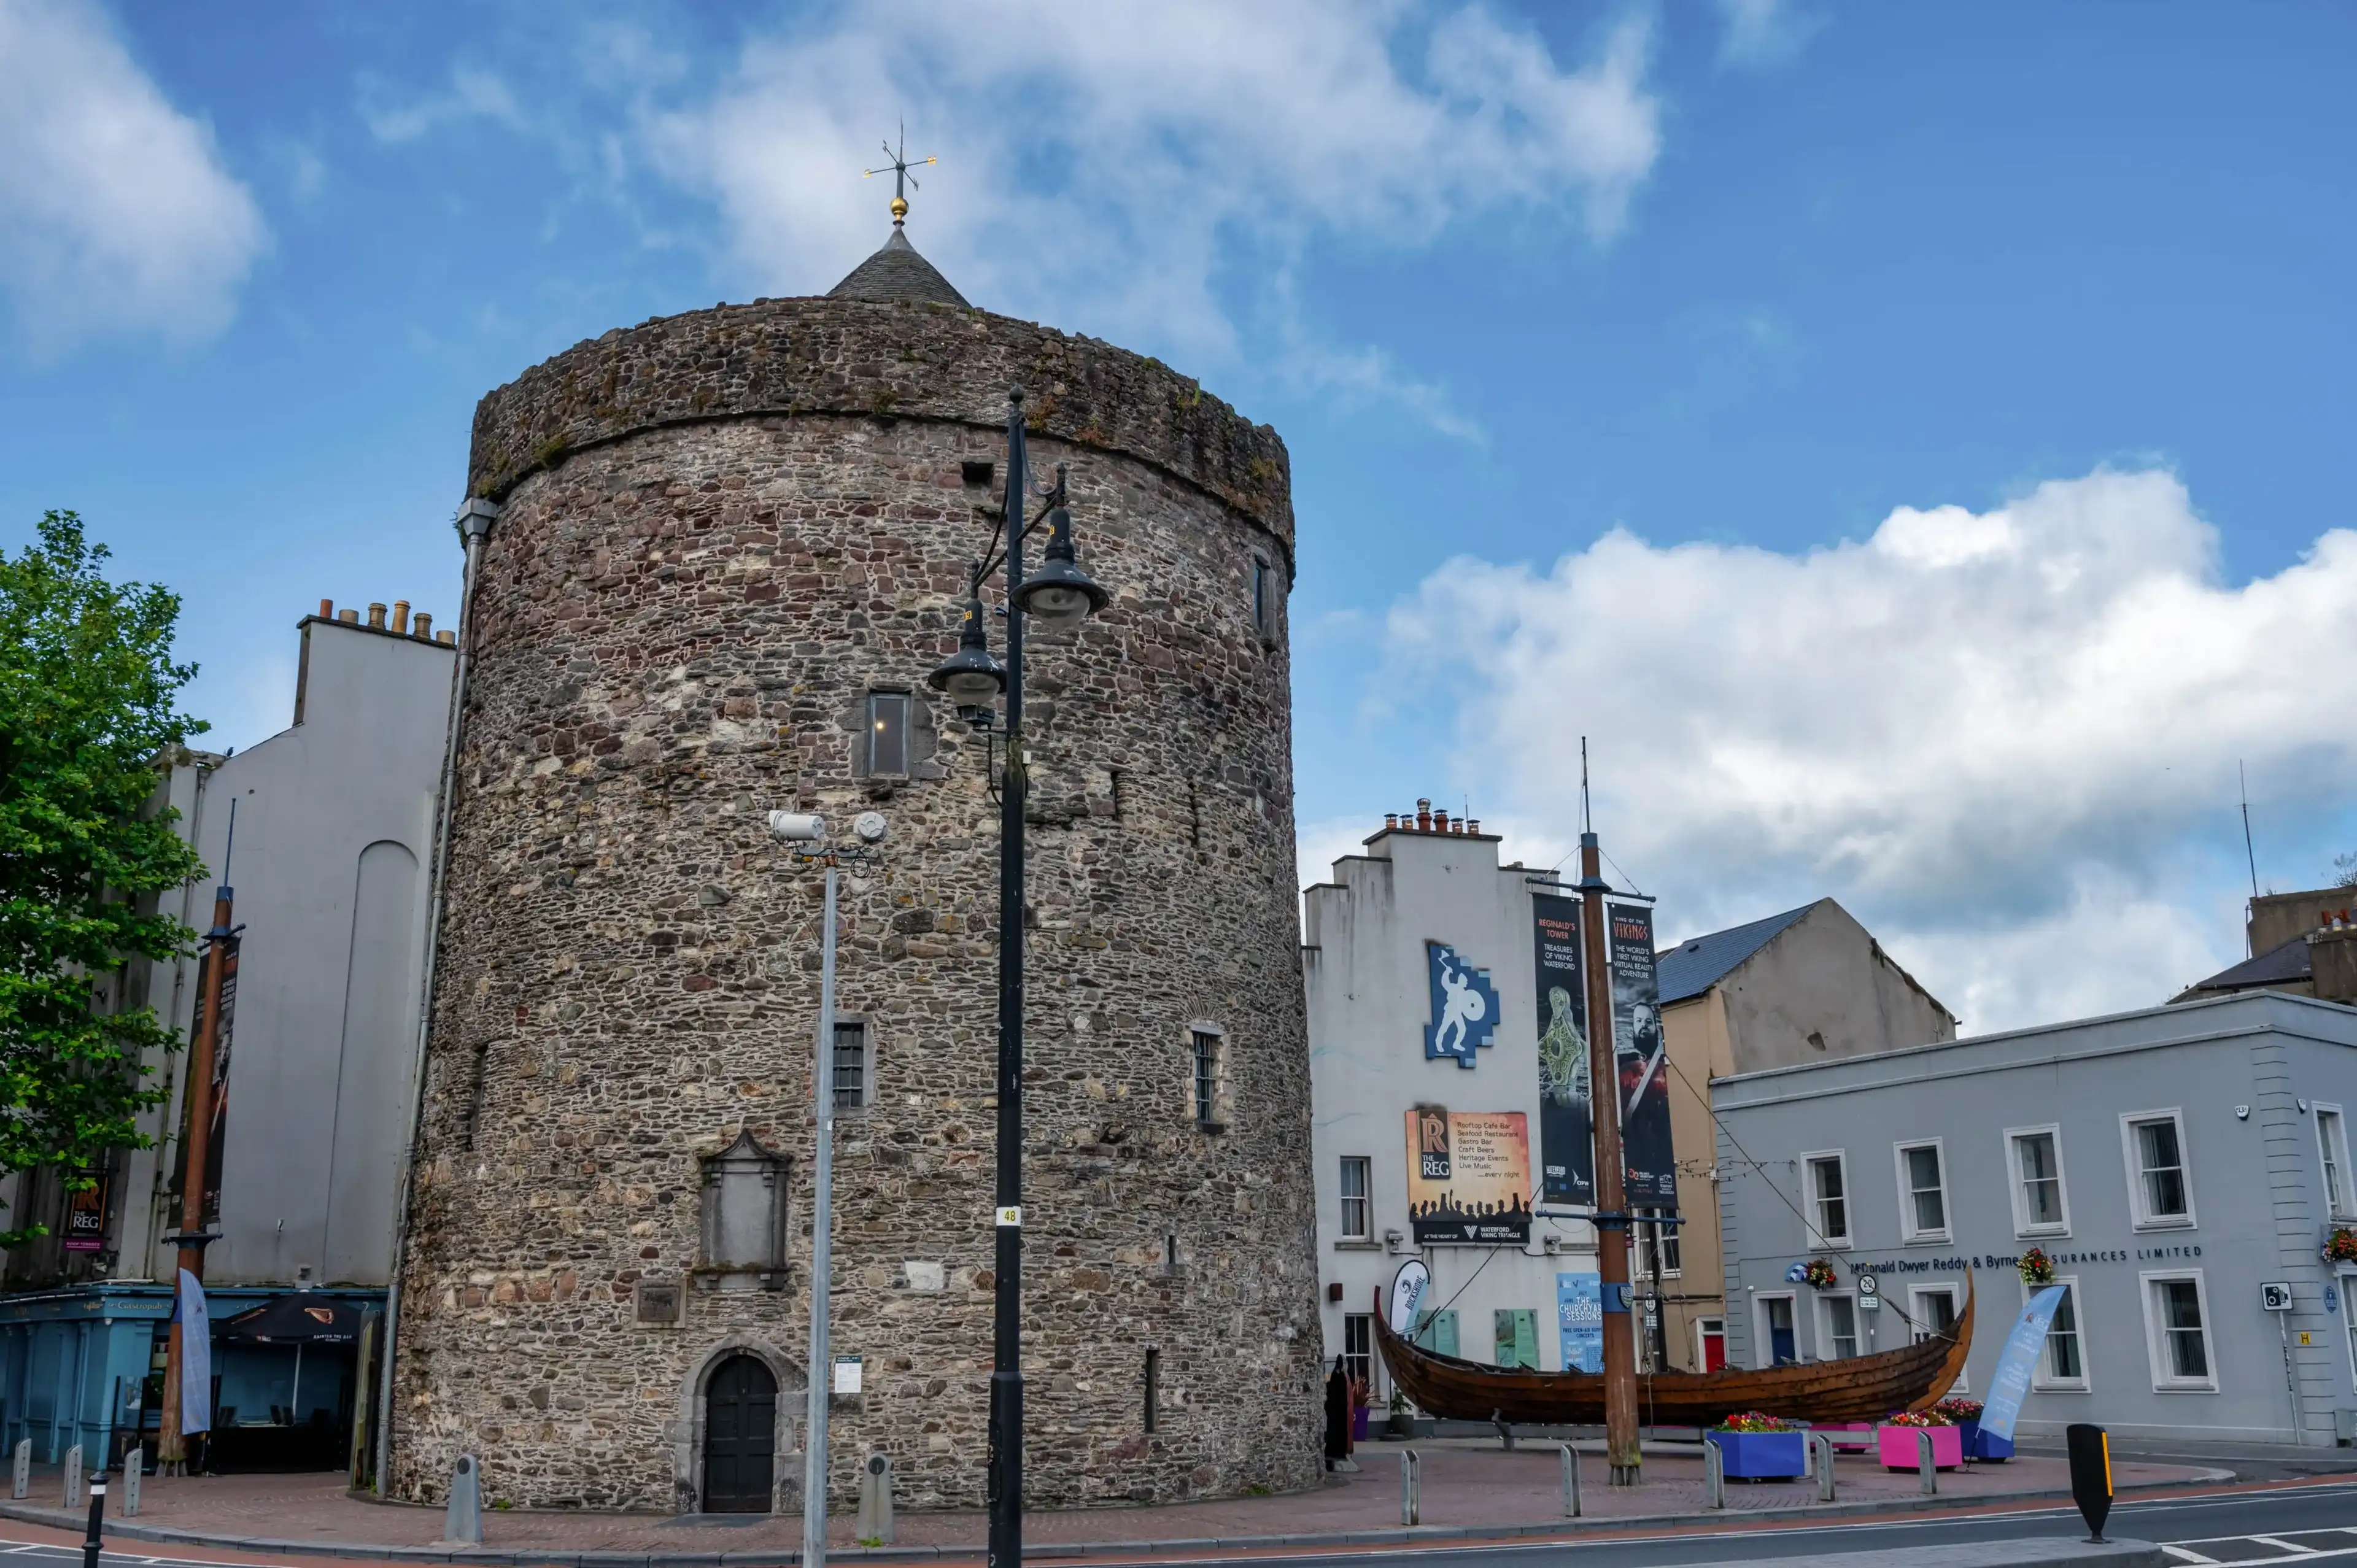 Best Waterford hotels. Cheap hotels in Waterford, Ireland